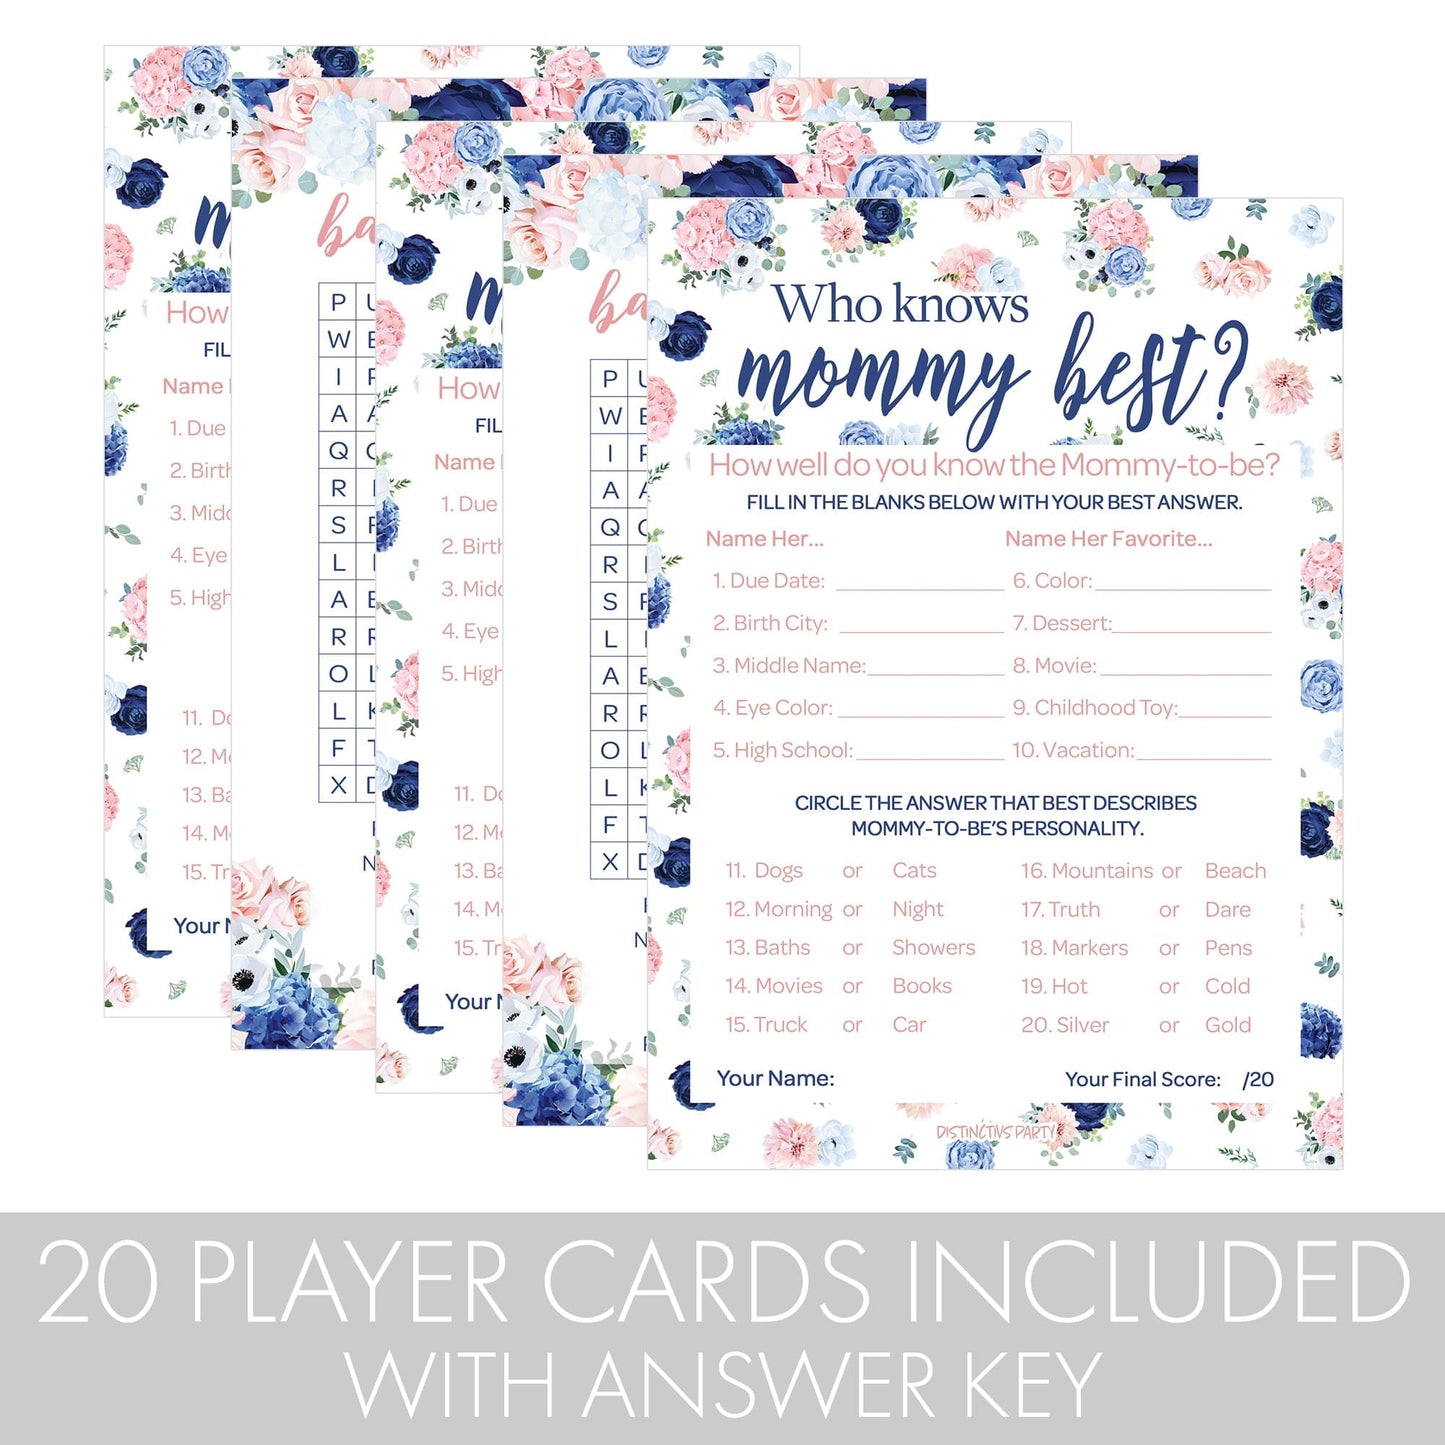 These 20 double-sided game cards are made of premium card stock and feature easy-to-write-on surfaces, perfect for a baby shower game that encourages guests to turn off their phones and share memories with loved ones